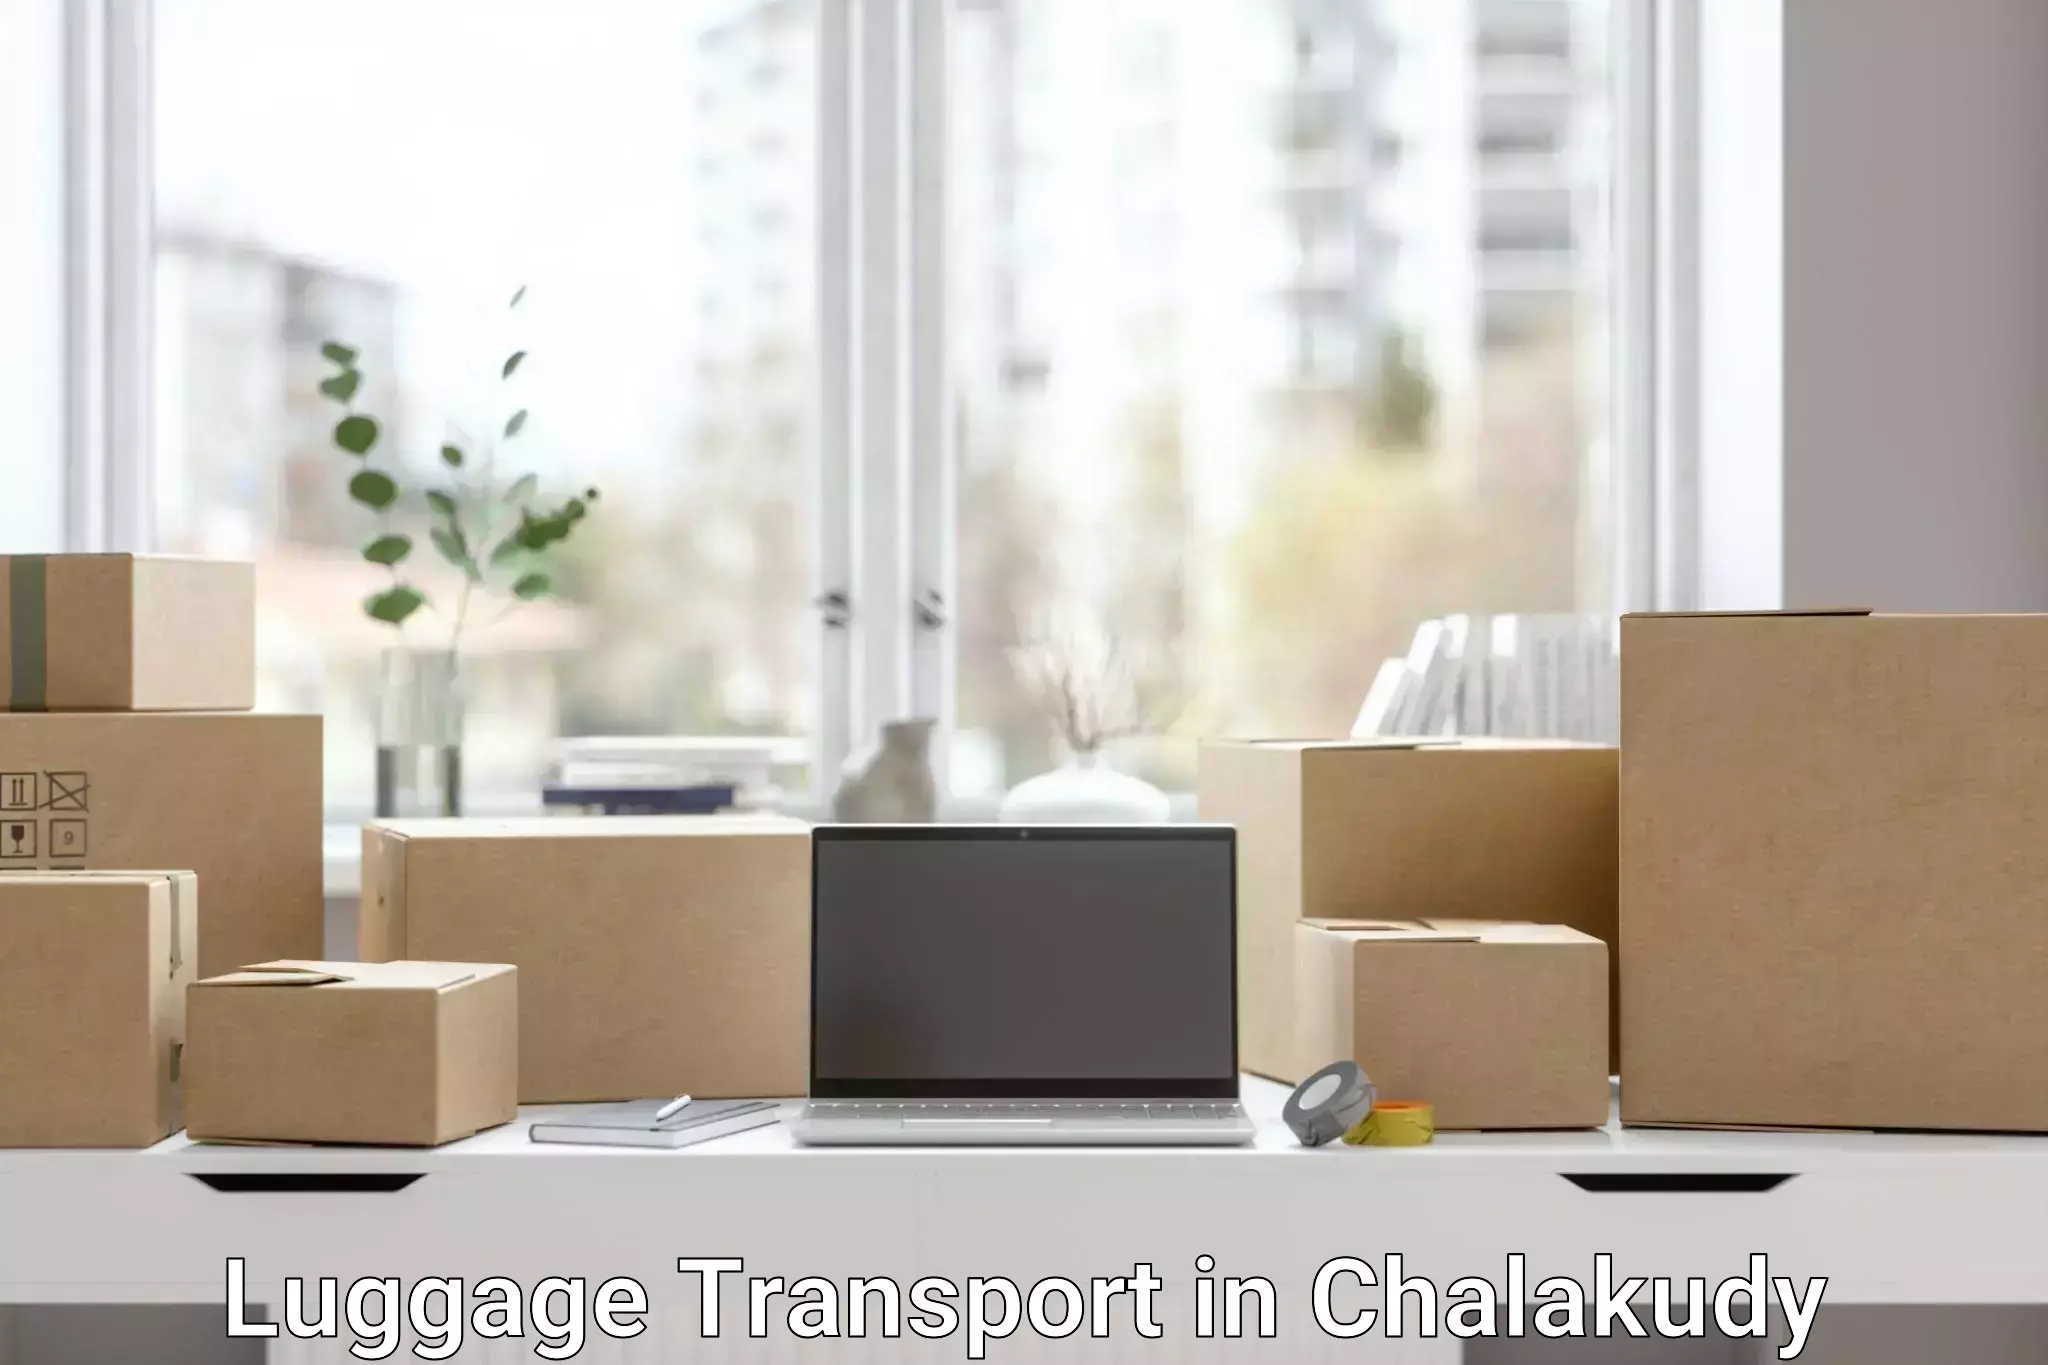 Automated luggage transport in Chalakudy